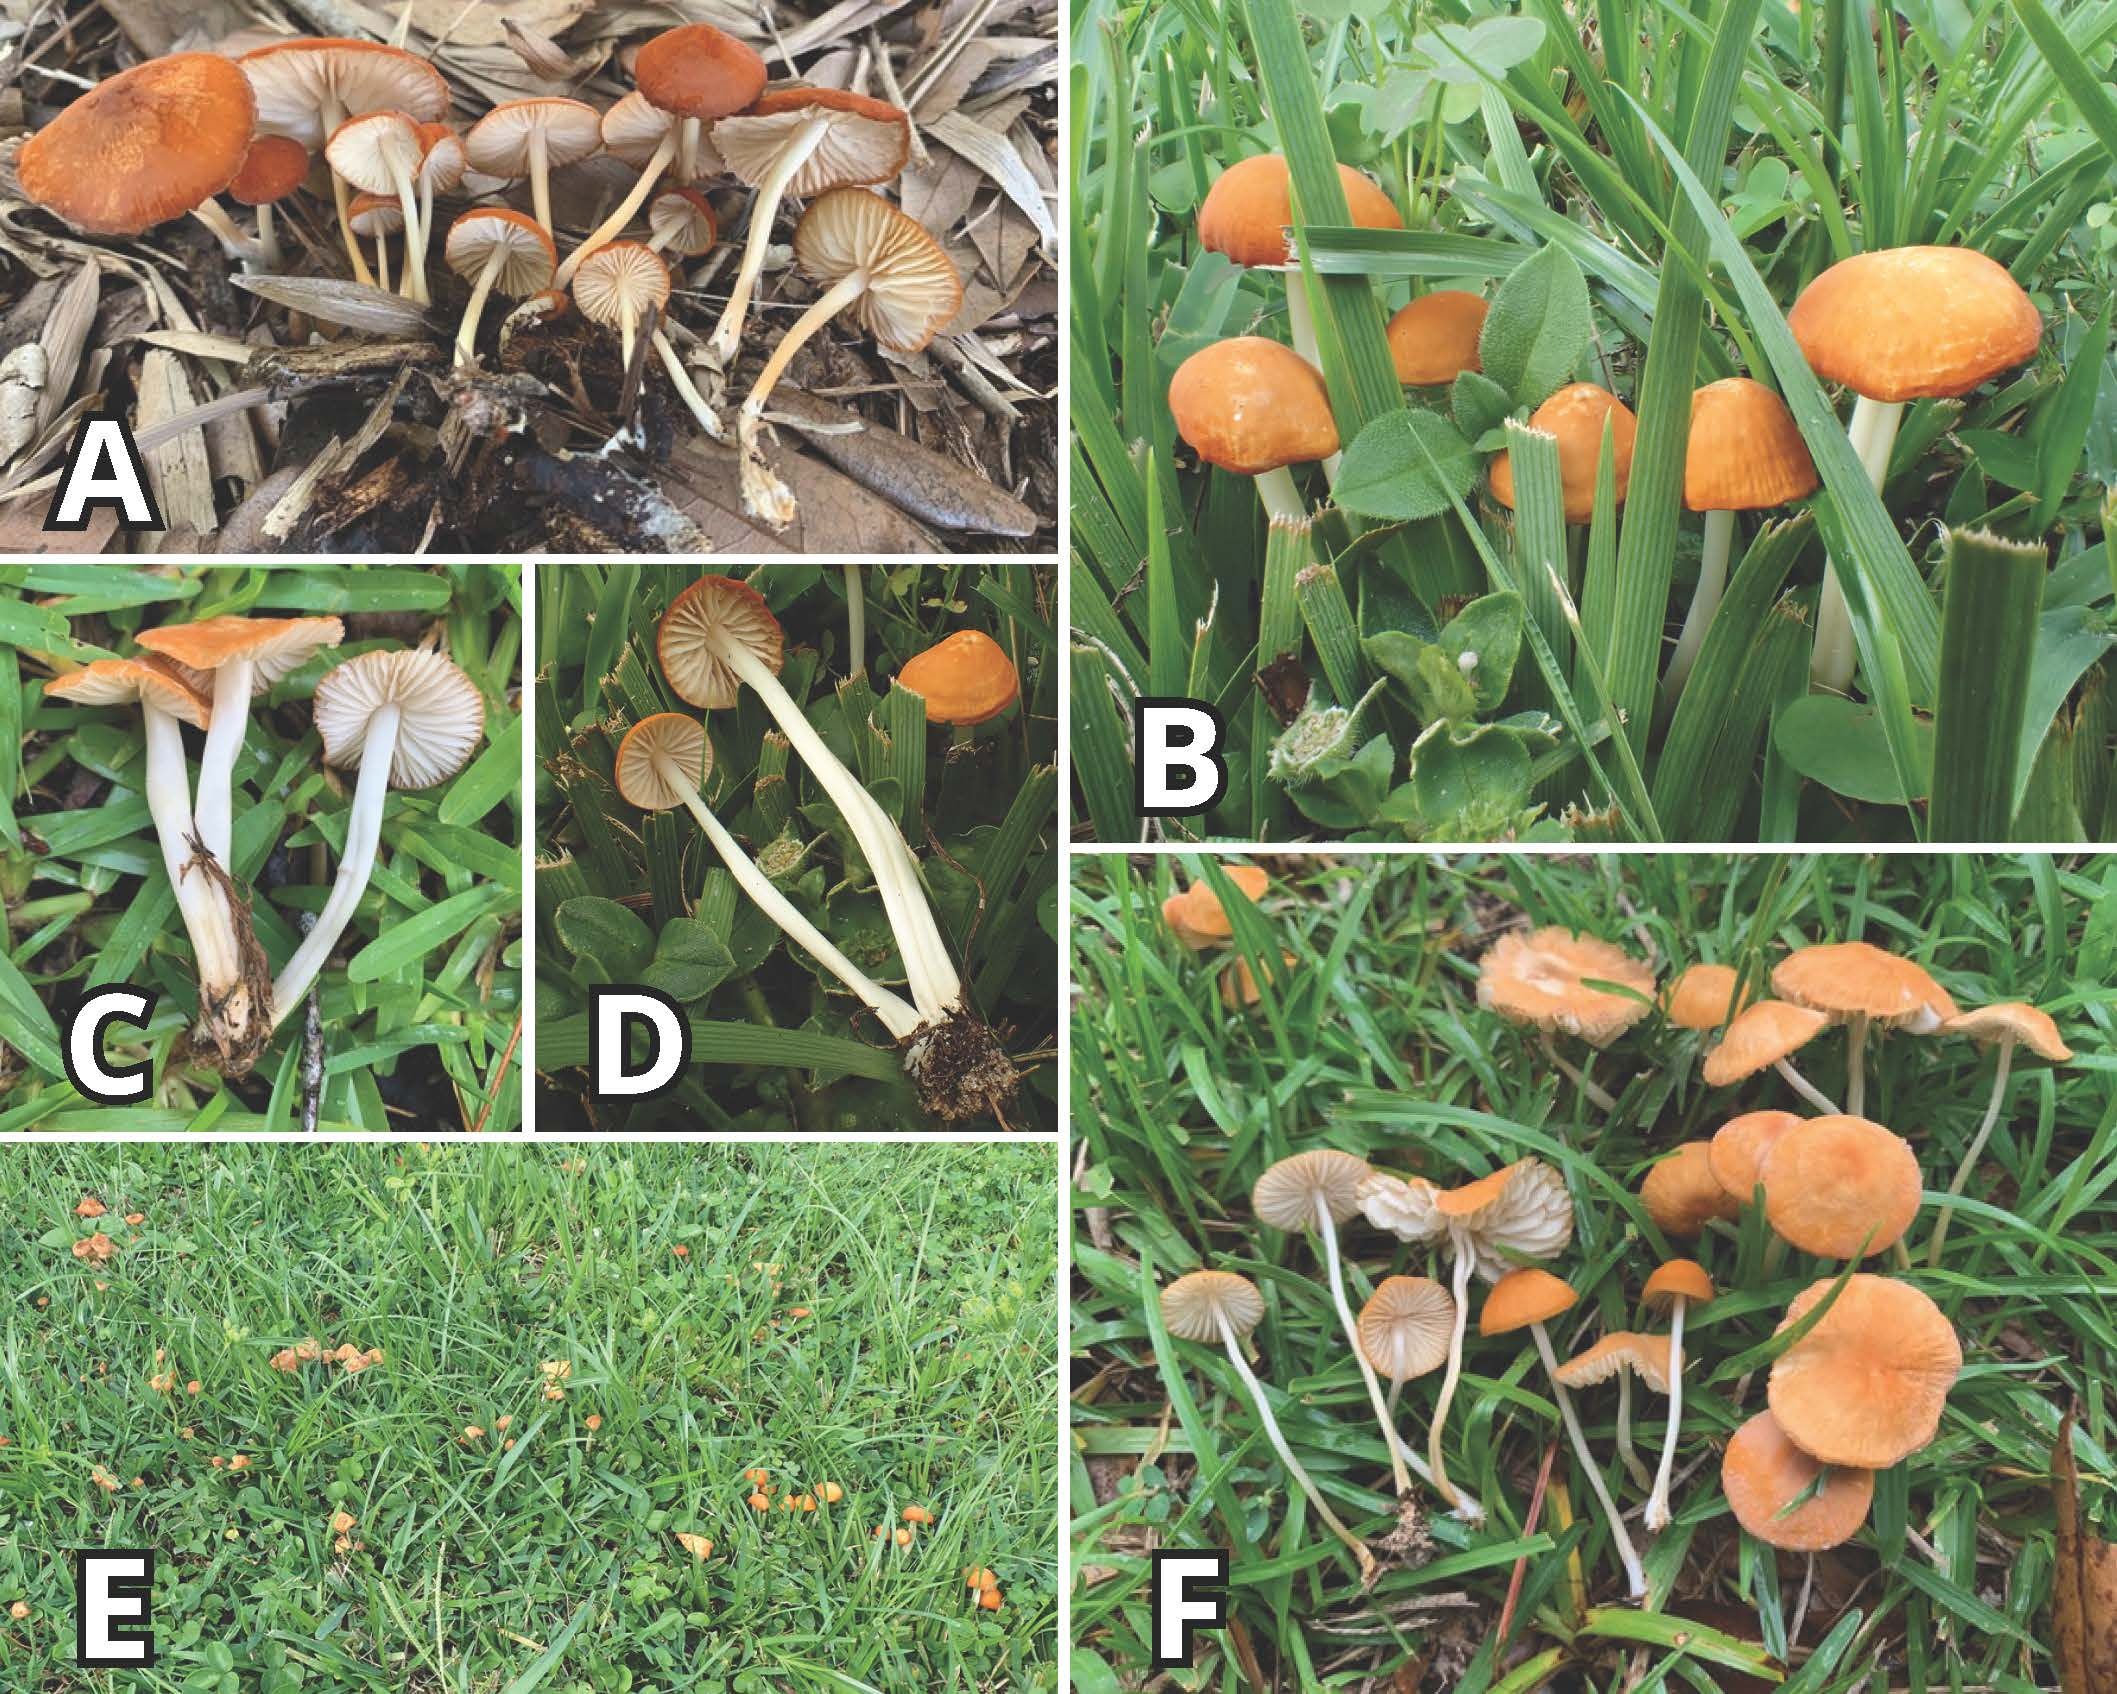 Morphology of Marasmius vagus (A–F). Photos of fresh specimens highlight the vibrant orange cap coloration, the bright white stipe, and the white, closely-spaced gills. Mushrooms of Marasmius vagus typically grow in clusters and may sometimes form large congregations or partial fairy rings (as shown in E). 